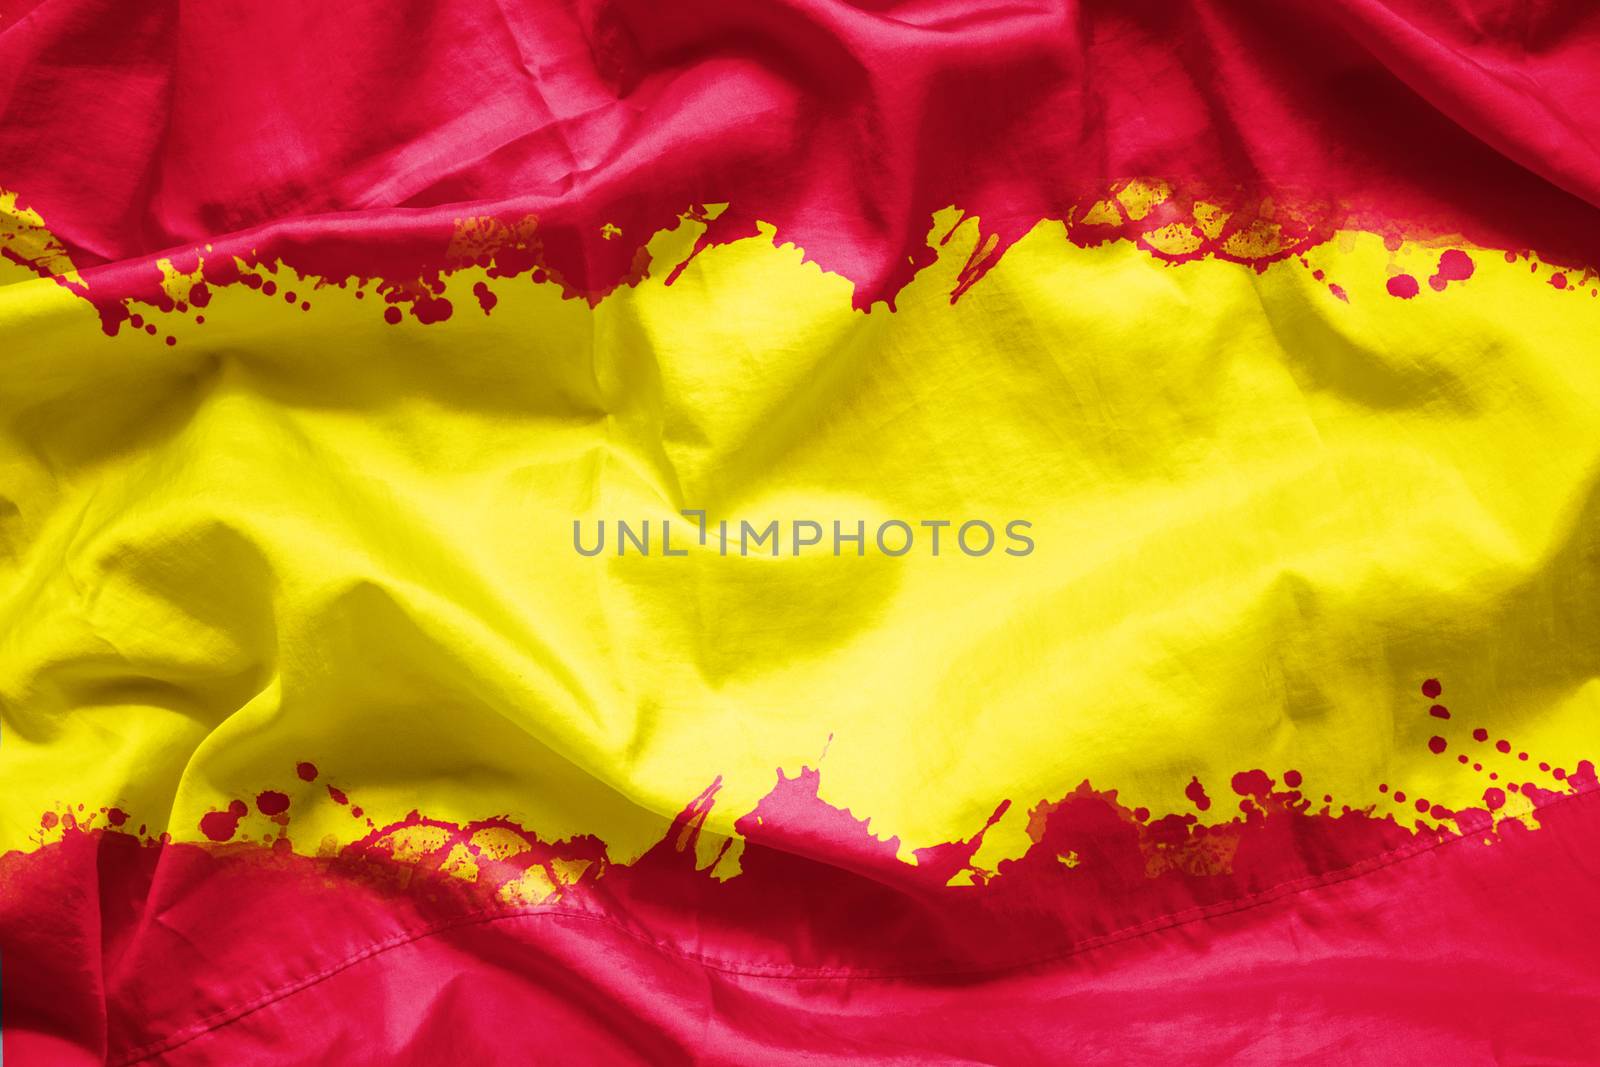 Flag Kingdom of Spain by watercolor paint brush on canvas fabric, grunge style